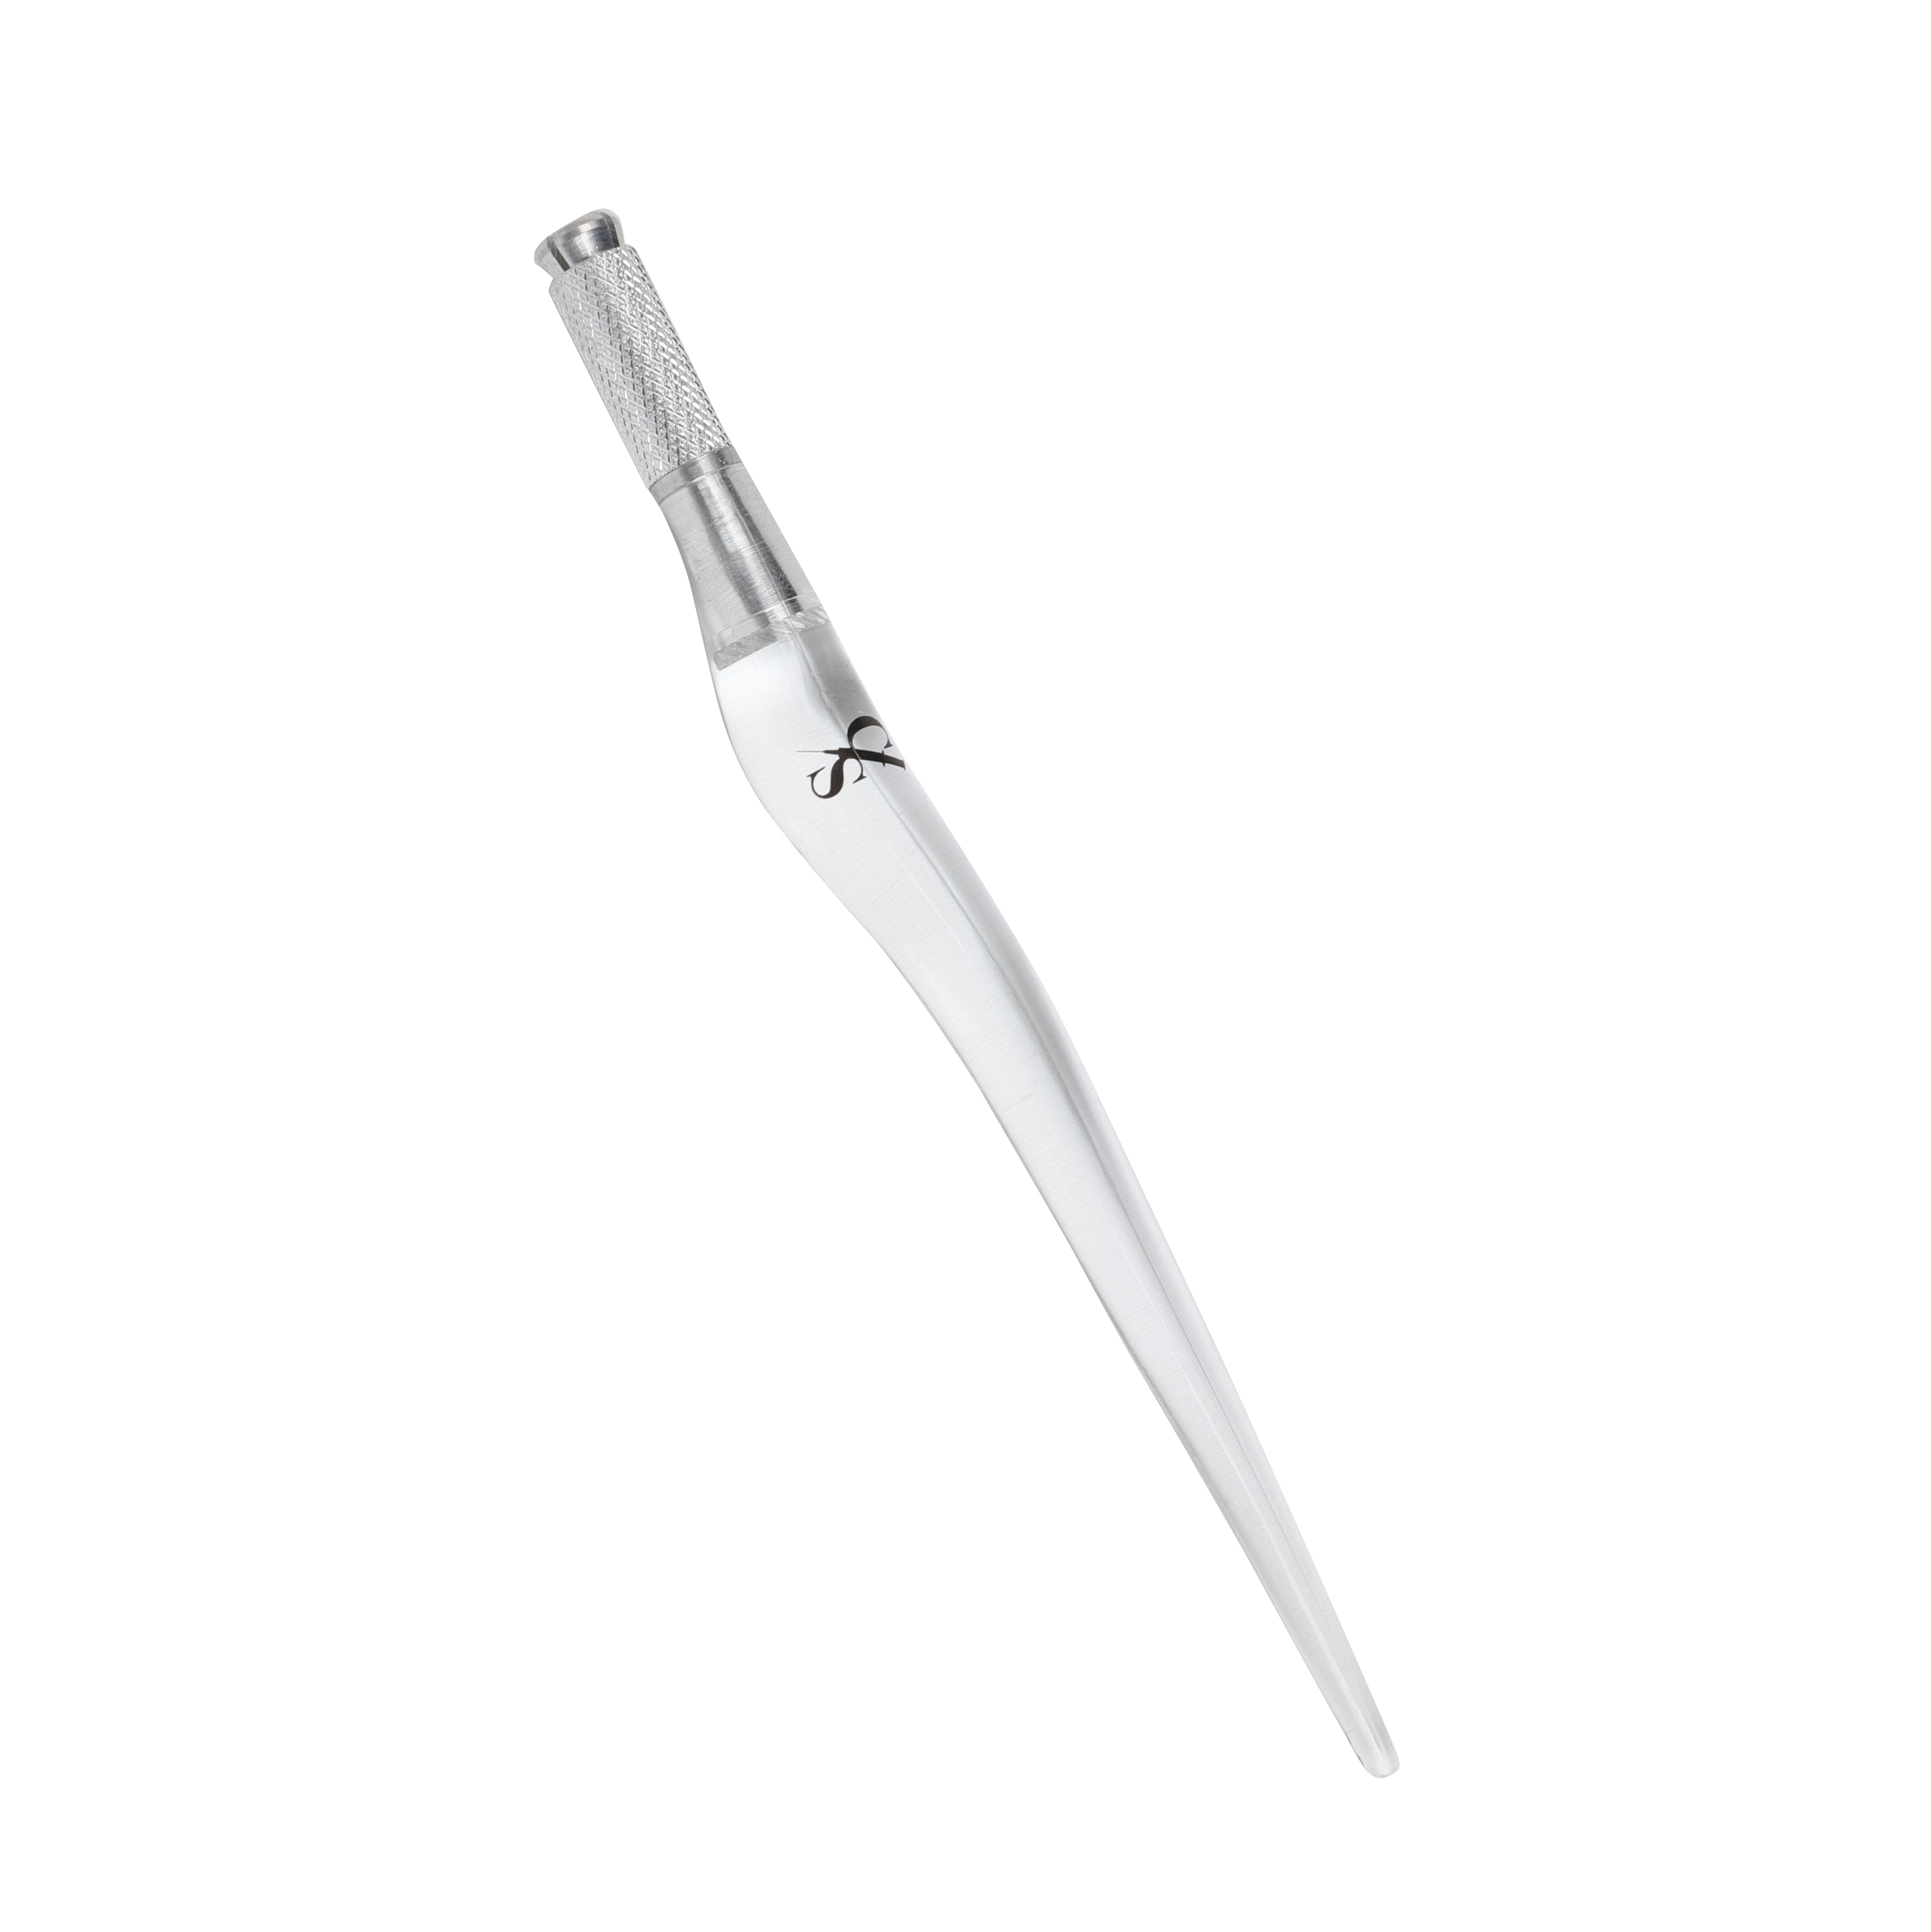 Crystal Clear Sterilized Single Use Handtool - Cosmedic Supplies